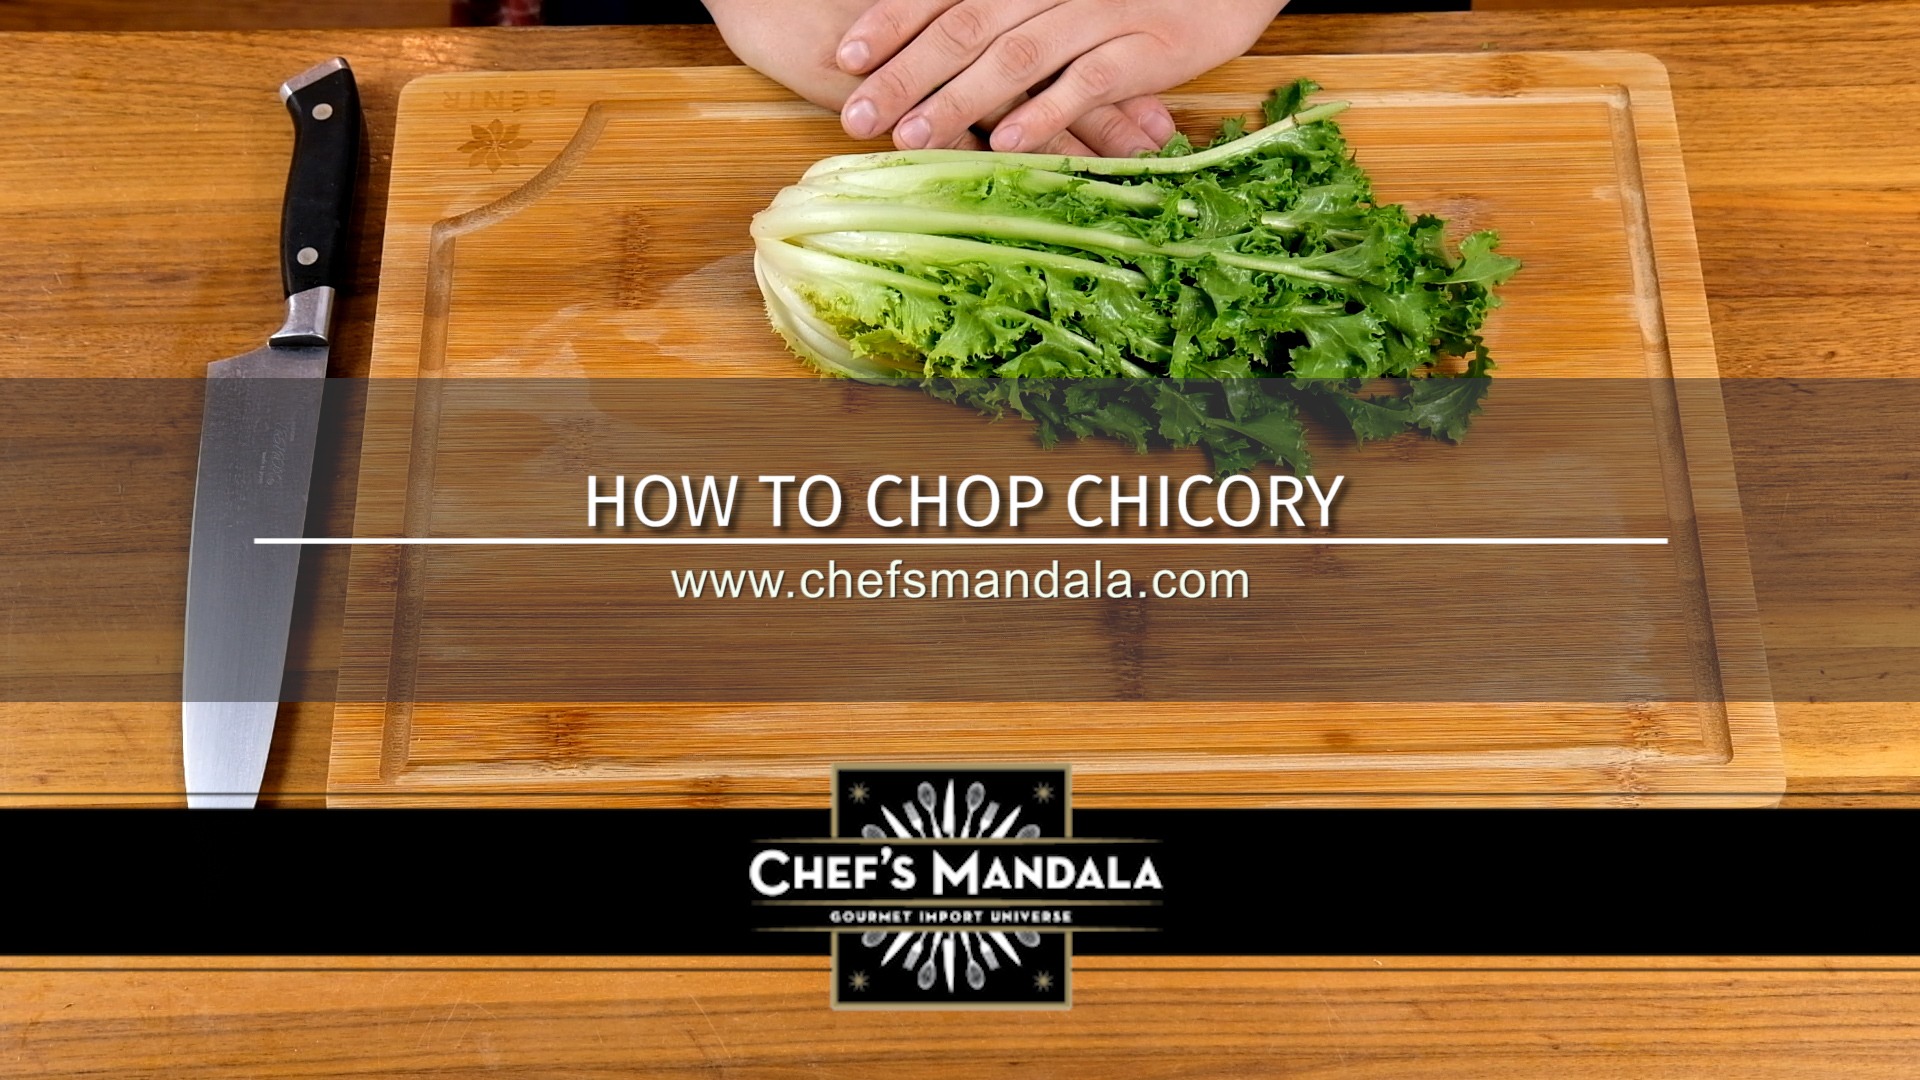 HOW TO CHOP CHICORY